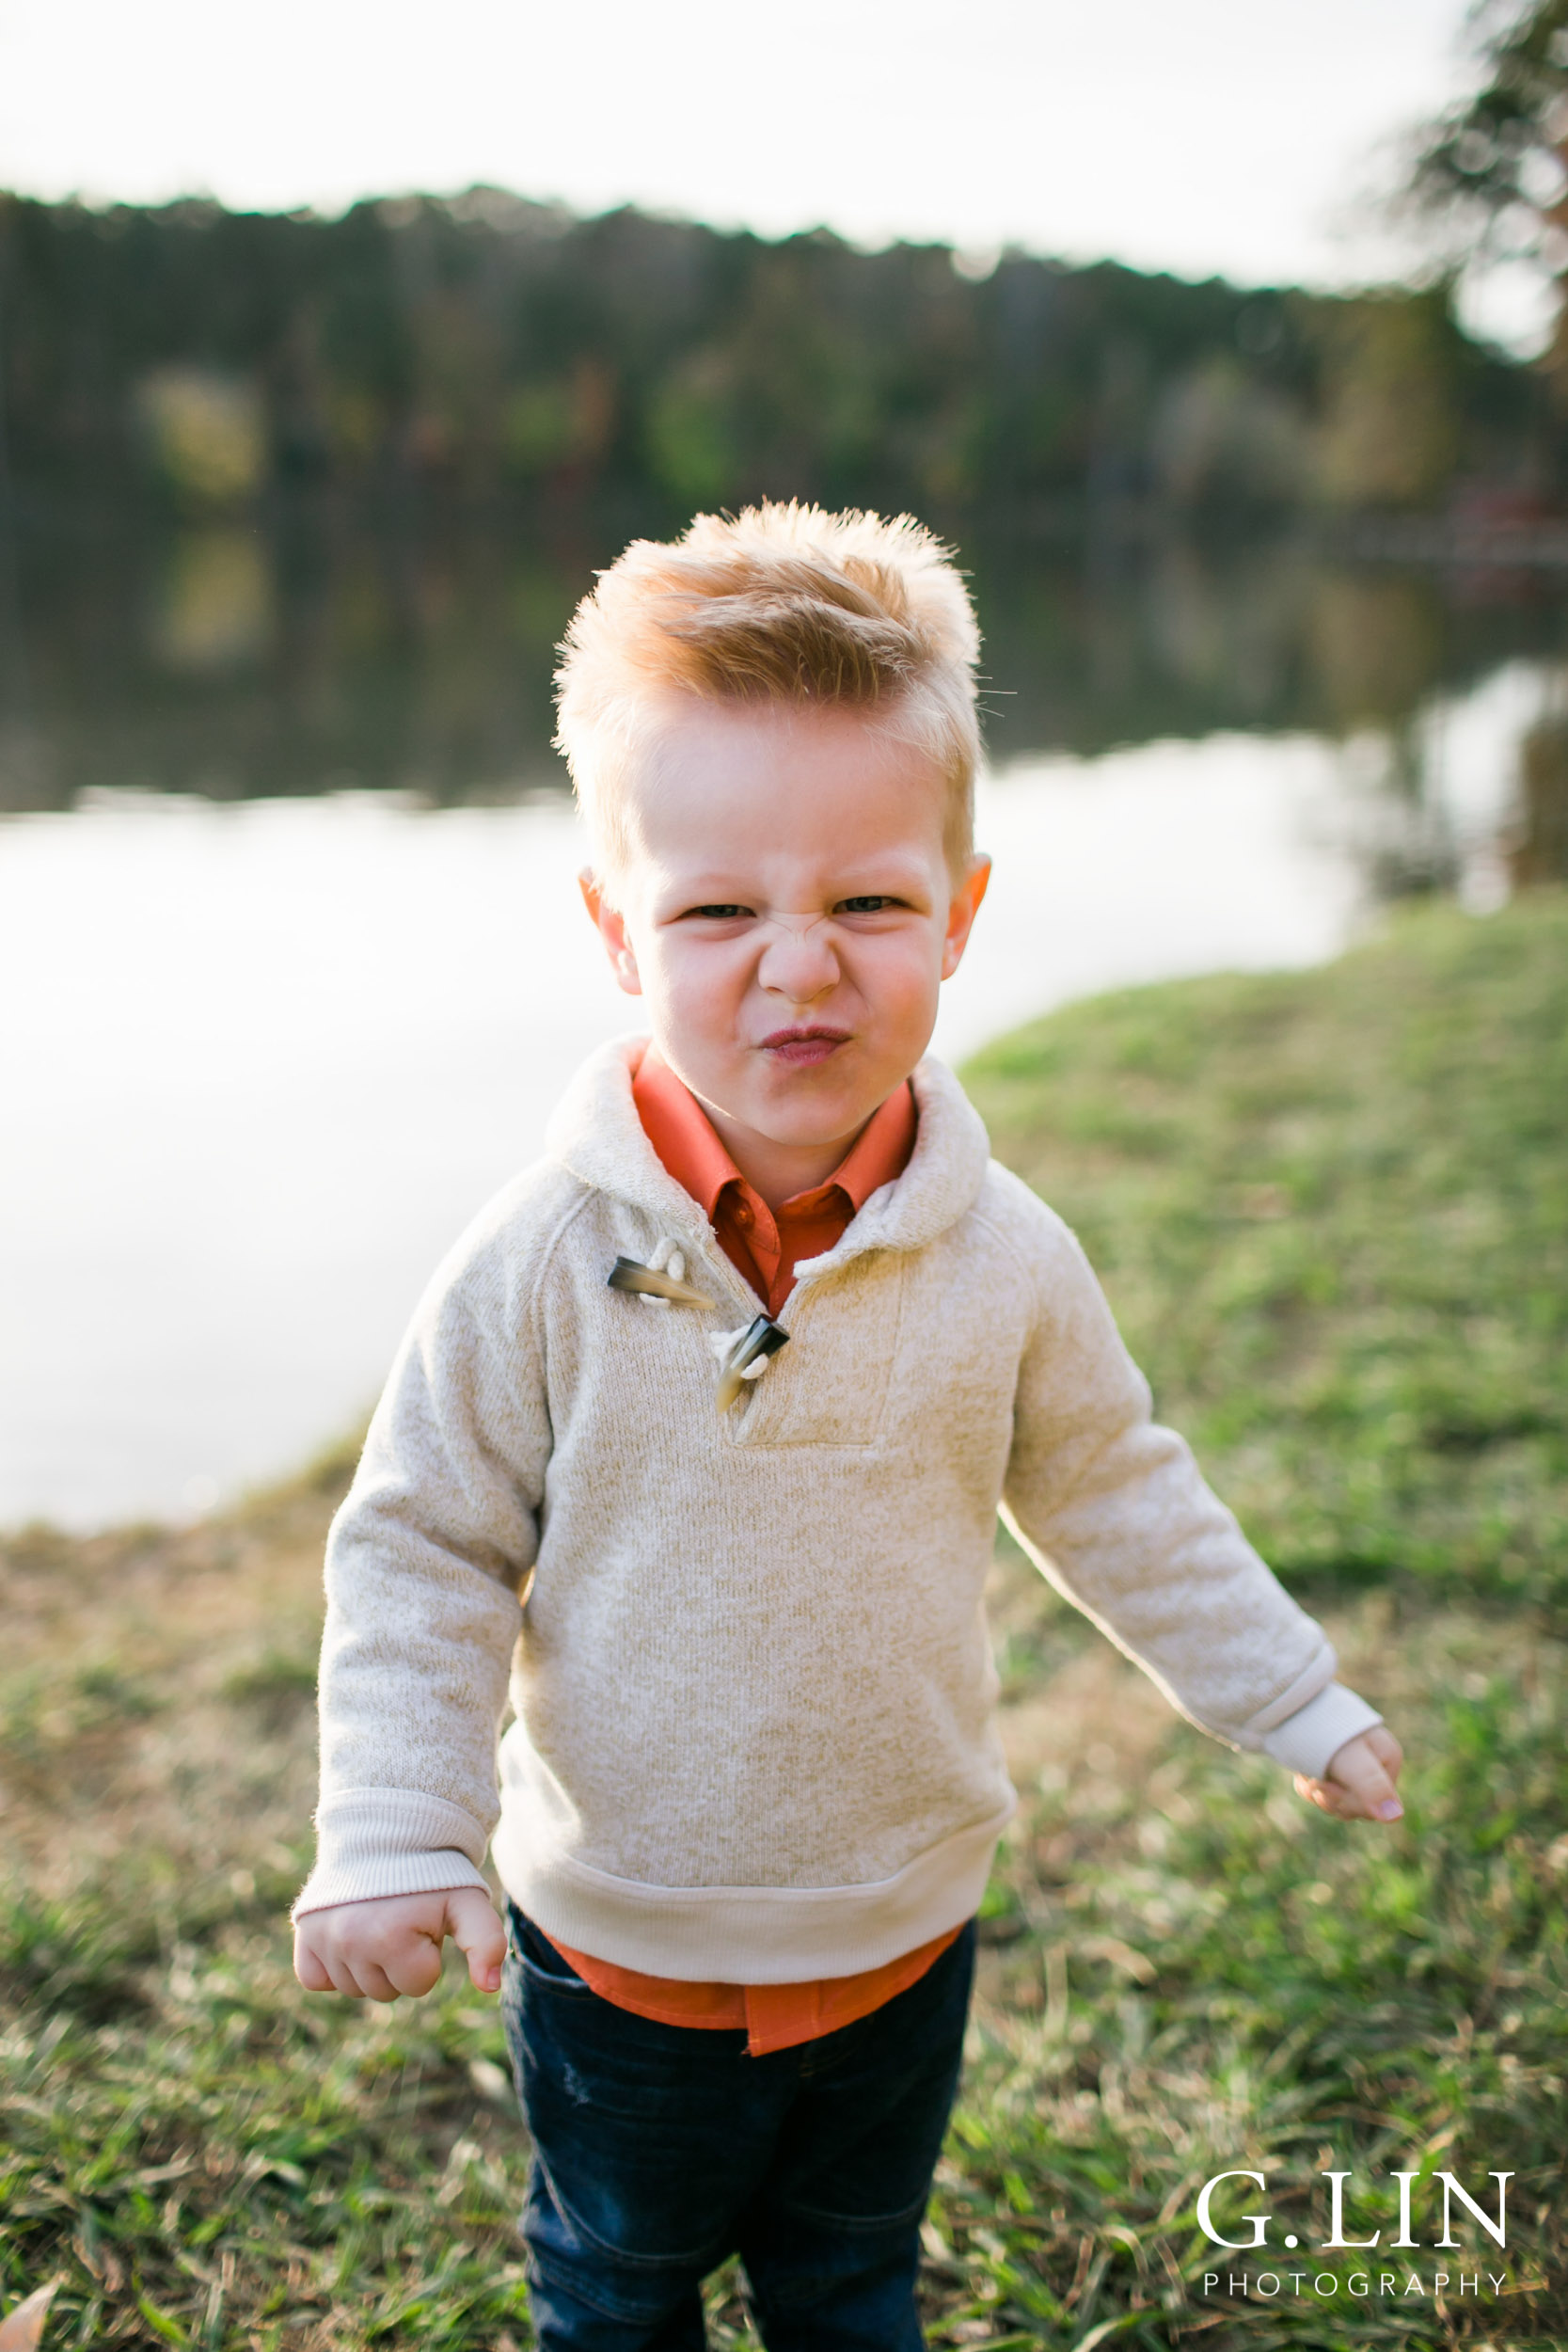 Raleigh Family Photographer | G. Lin Photography | portrait of youngest sibling making a funny face